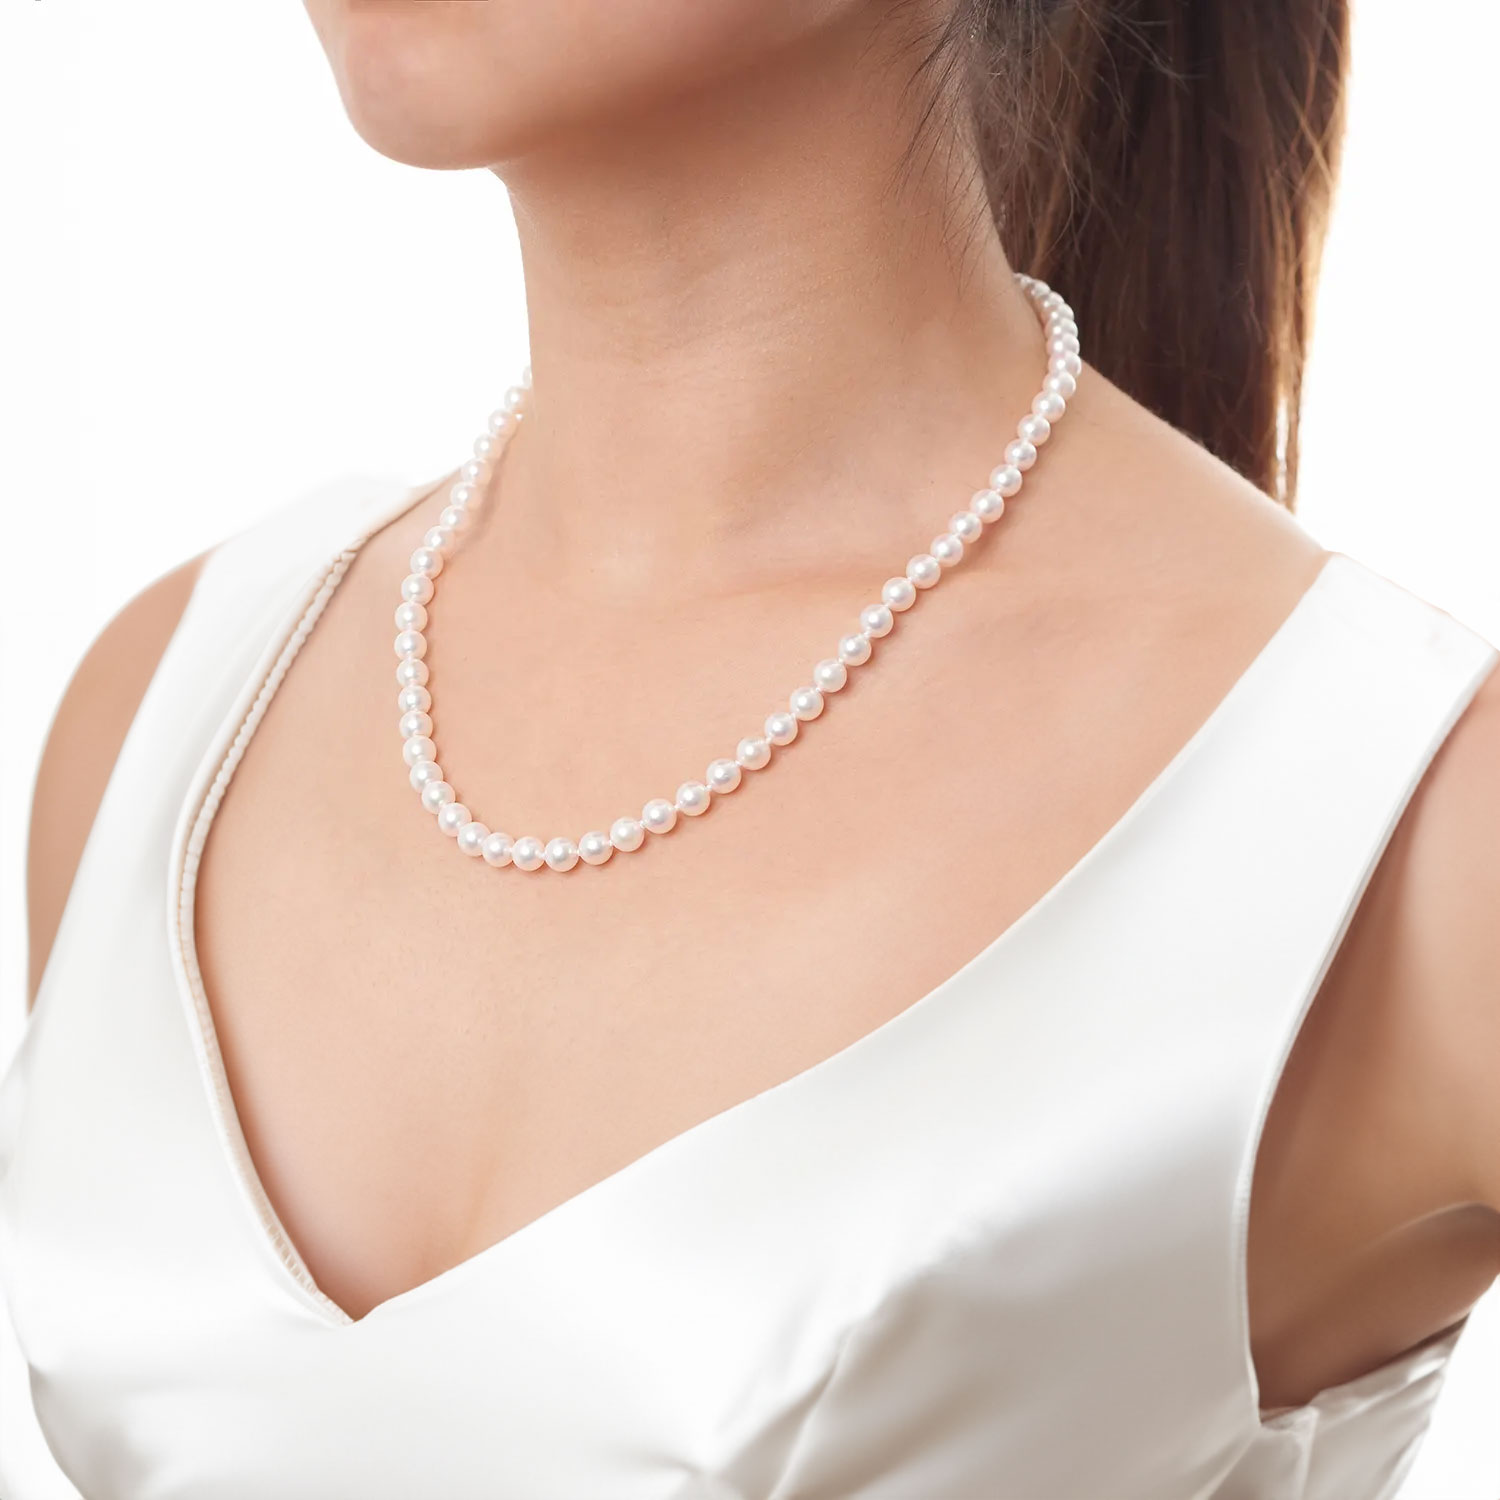 How to Build a Custom Pearl Necklace | Add-A-Pearl